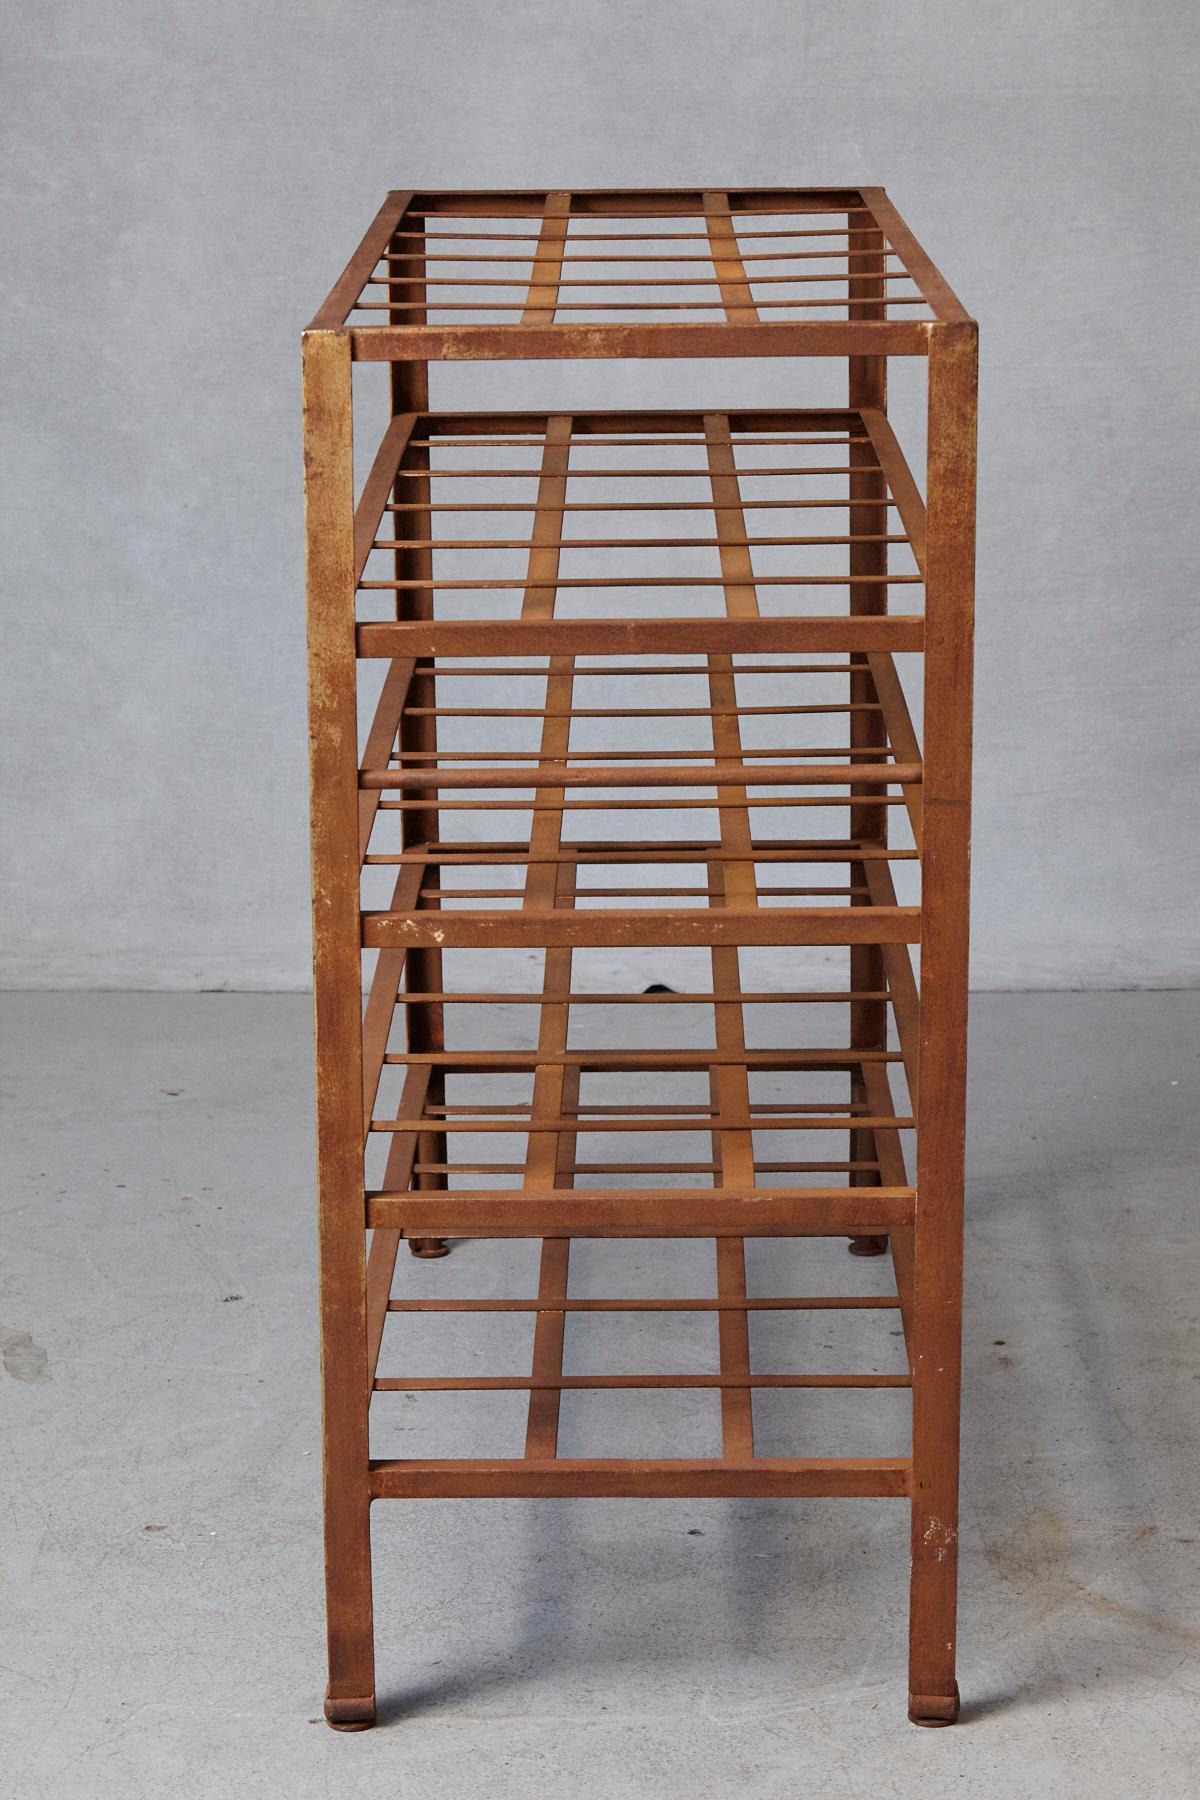 Mid-20th Century Industrial 5 Tier Shelf with Grid Shelves for Books or Usage as Seedling Planter For Sale